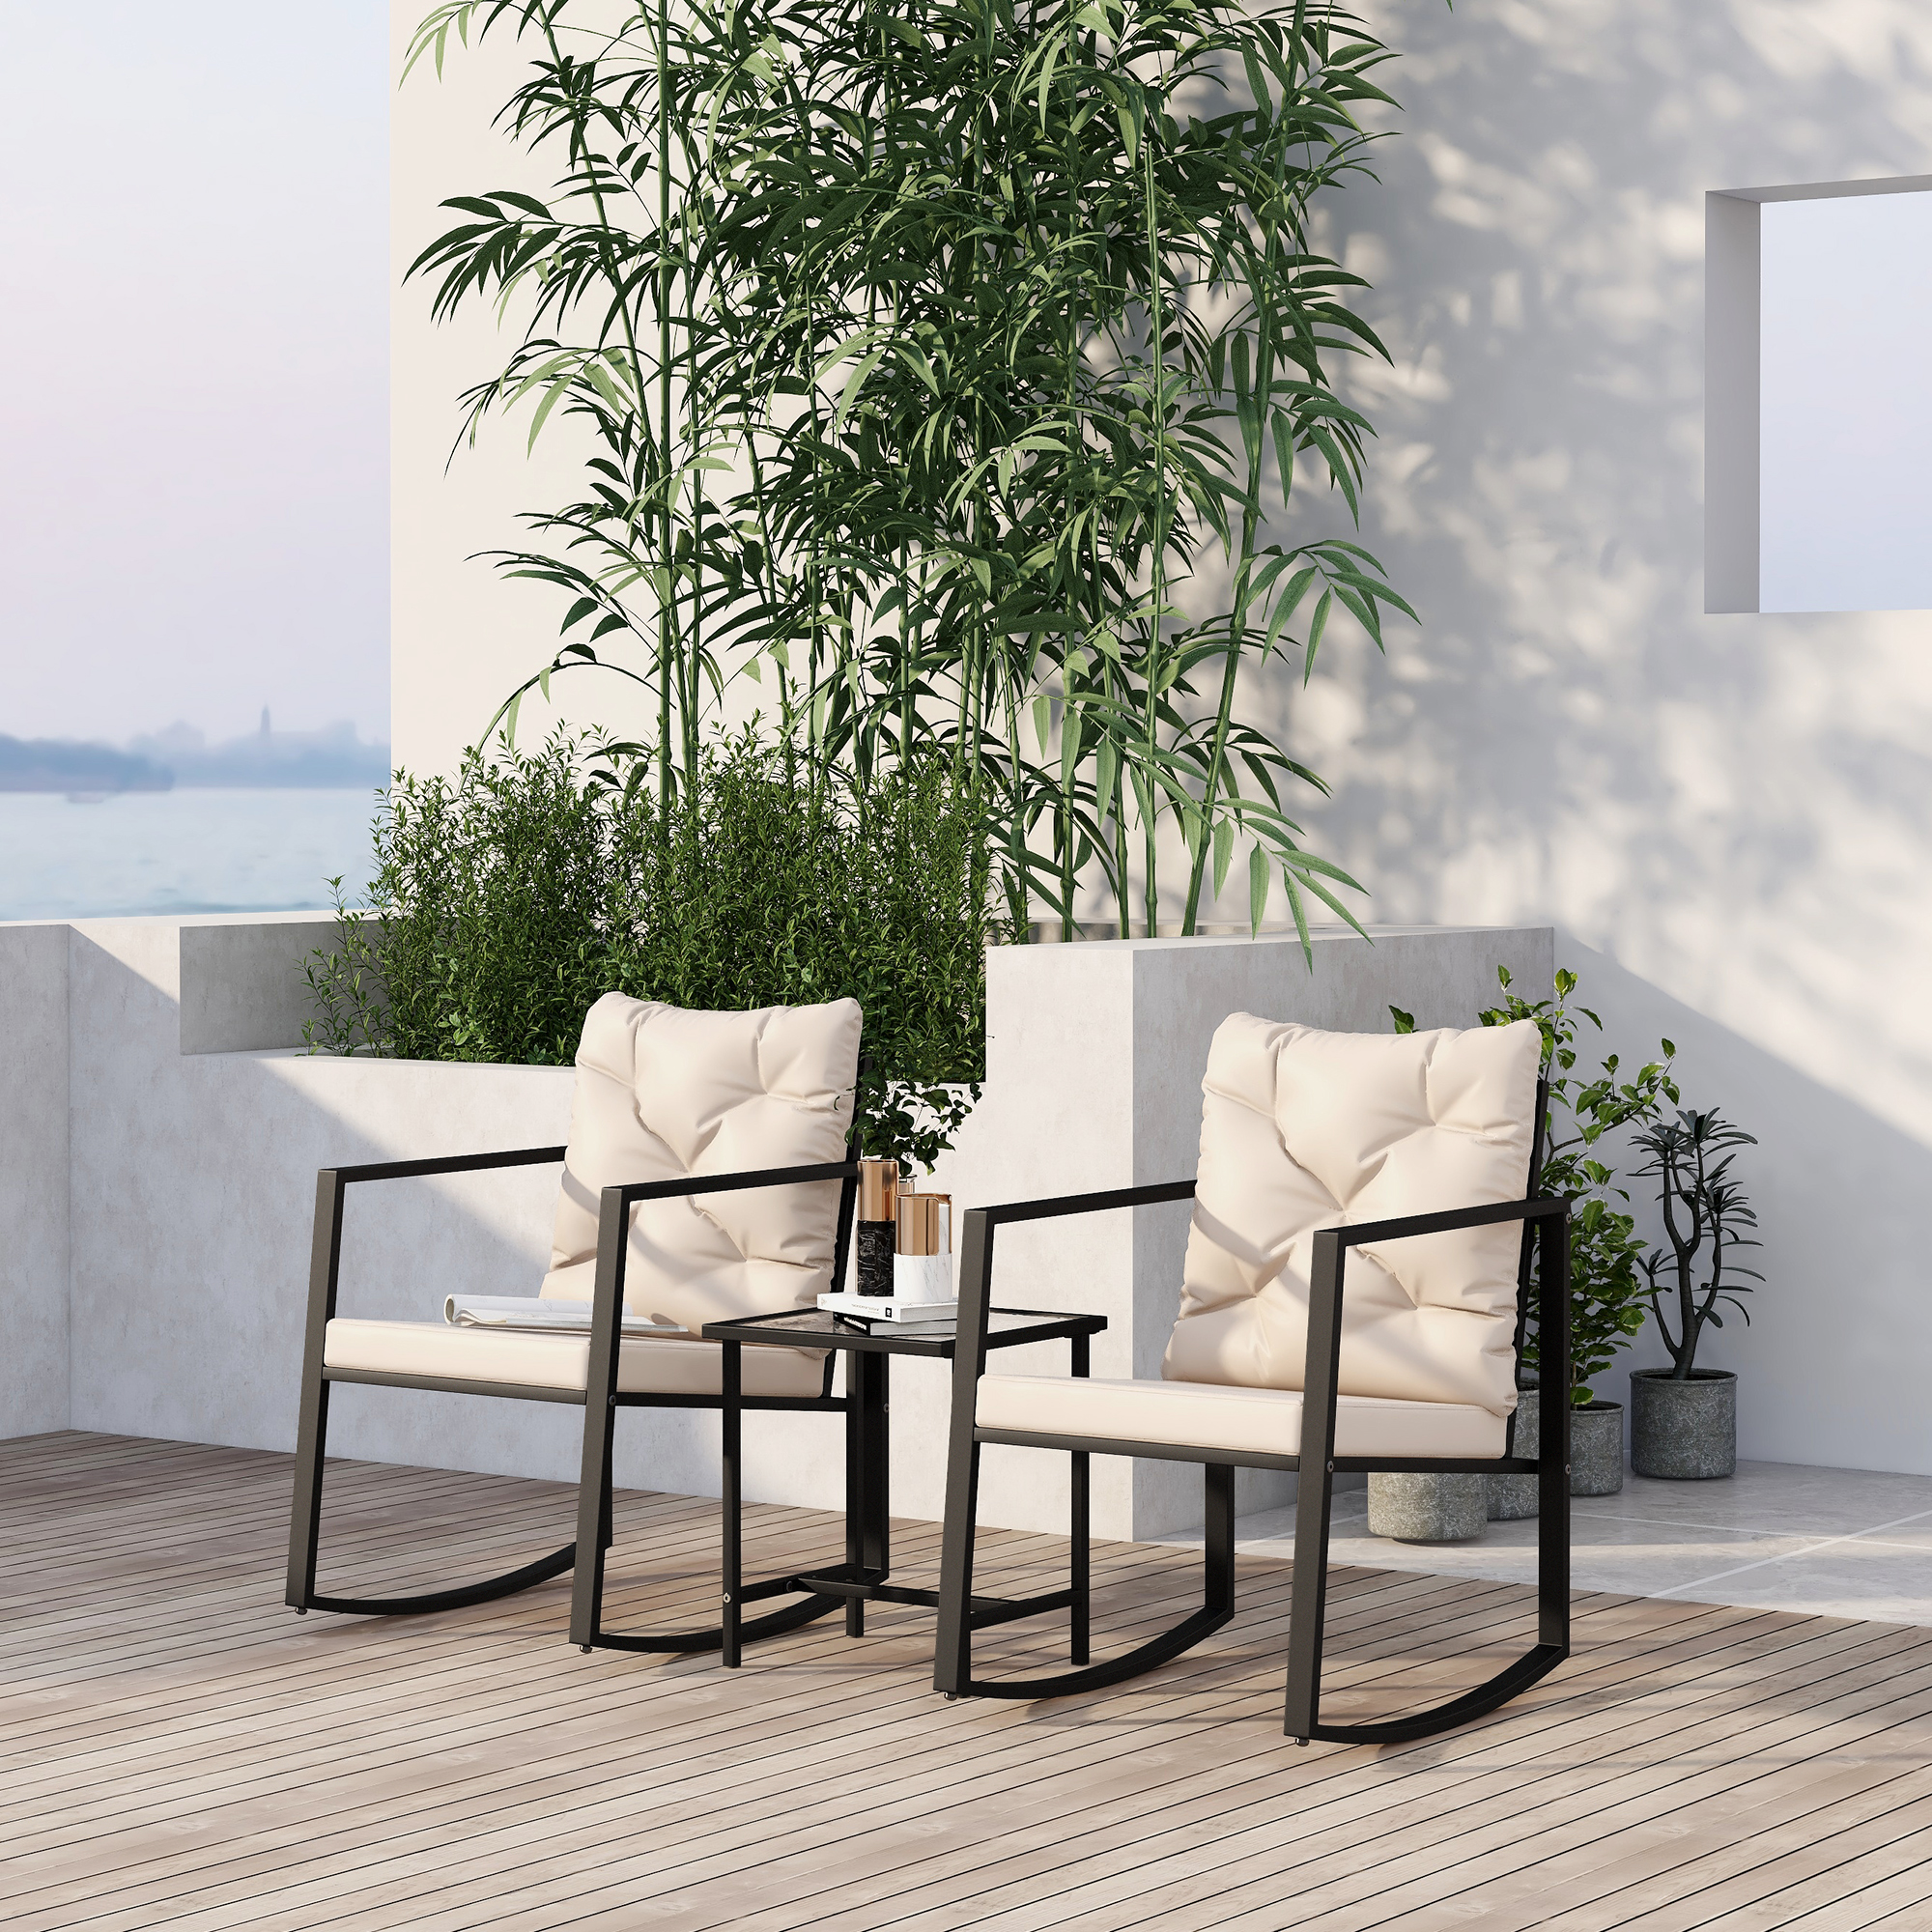 3 Pieces Patio Set Outdoor Patio Furniture Sets Modern Rocking Chair Furniture Sets Clearance Cushioned Chairs Conversation Sets with Coffee Table for Yard Garden Lawn Balcony Bistro (Beige) - image 3 of 7